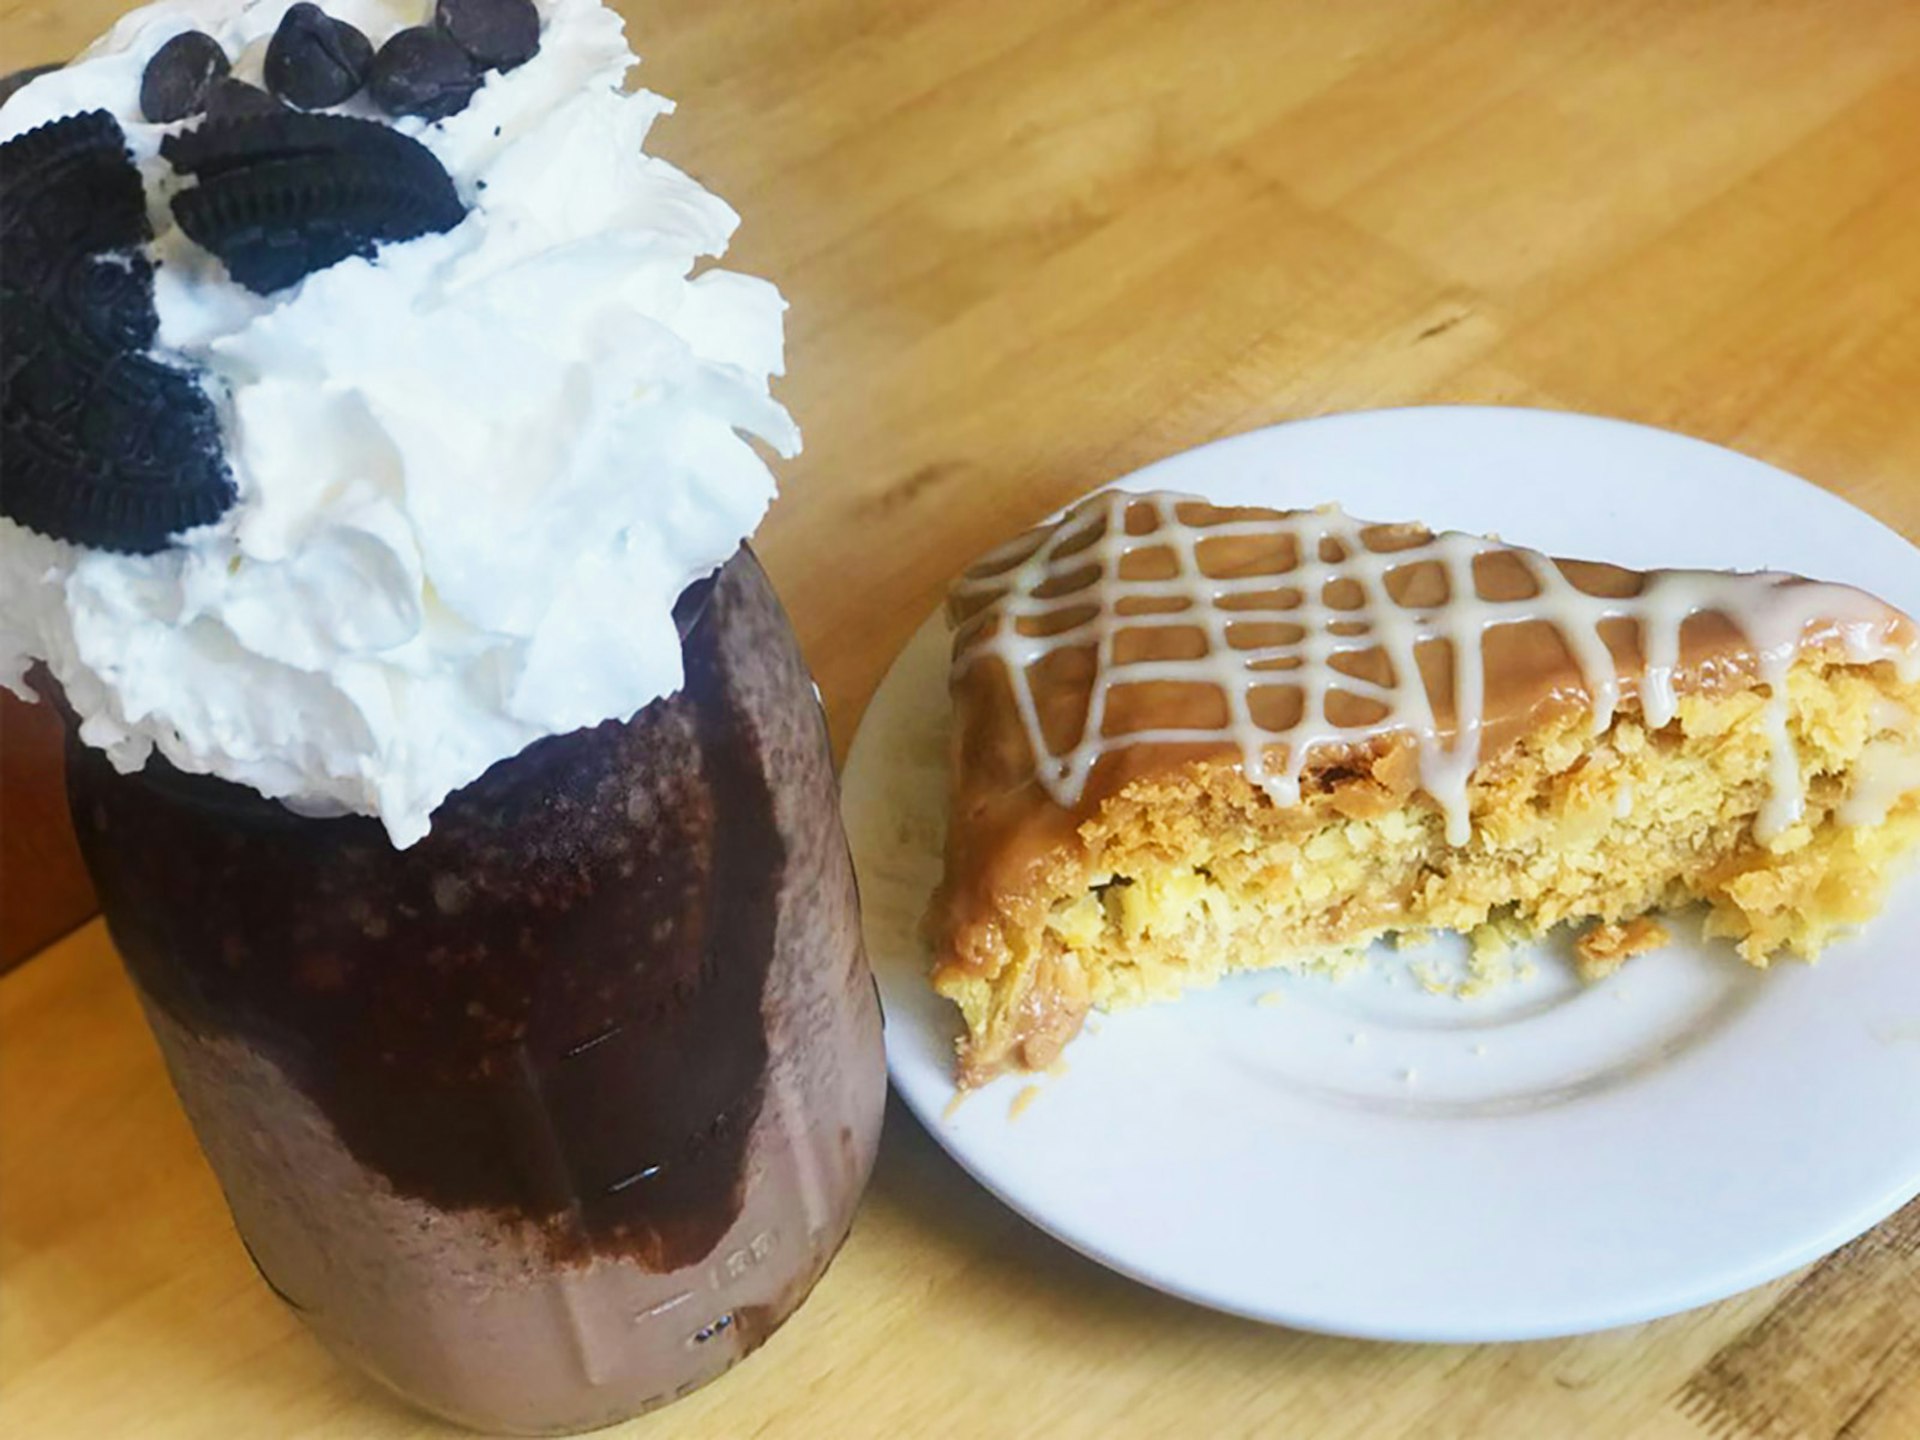 An Oreo shake and a torta chilena (pictured) are popular selections to satisfy that sweet tooth at Café Miel Maria Esther Abissi / Lonely Planet